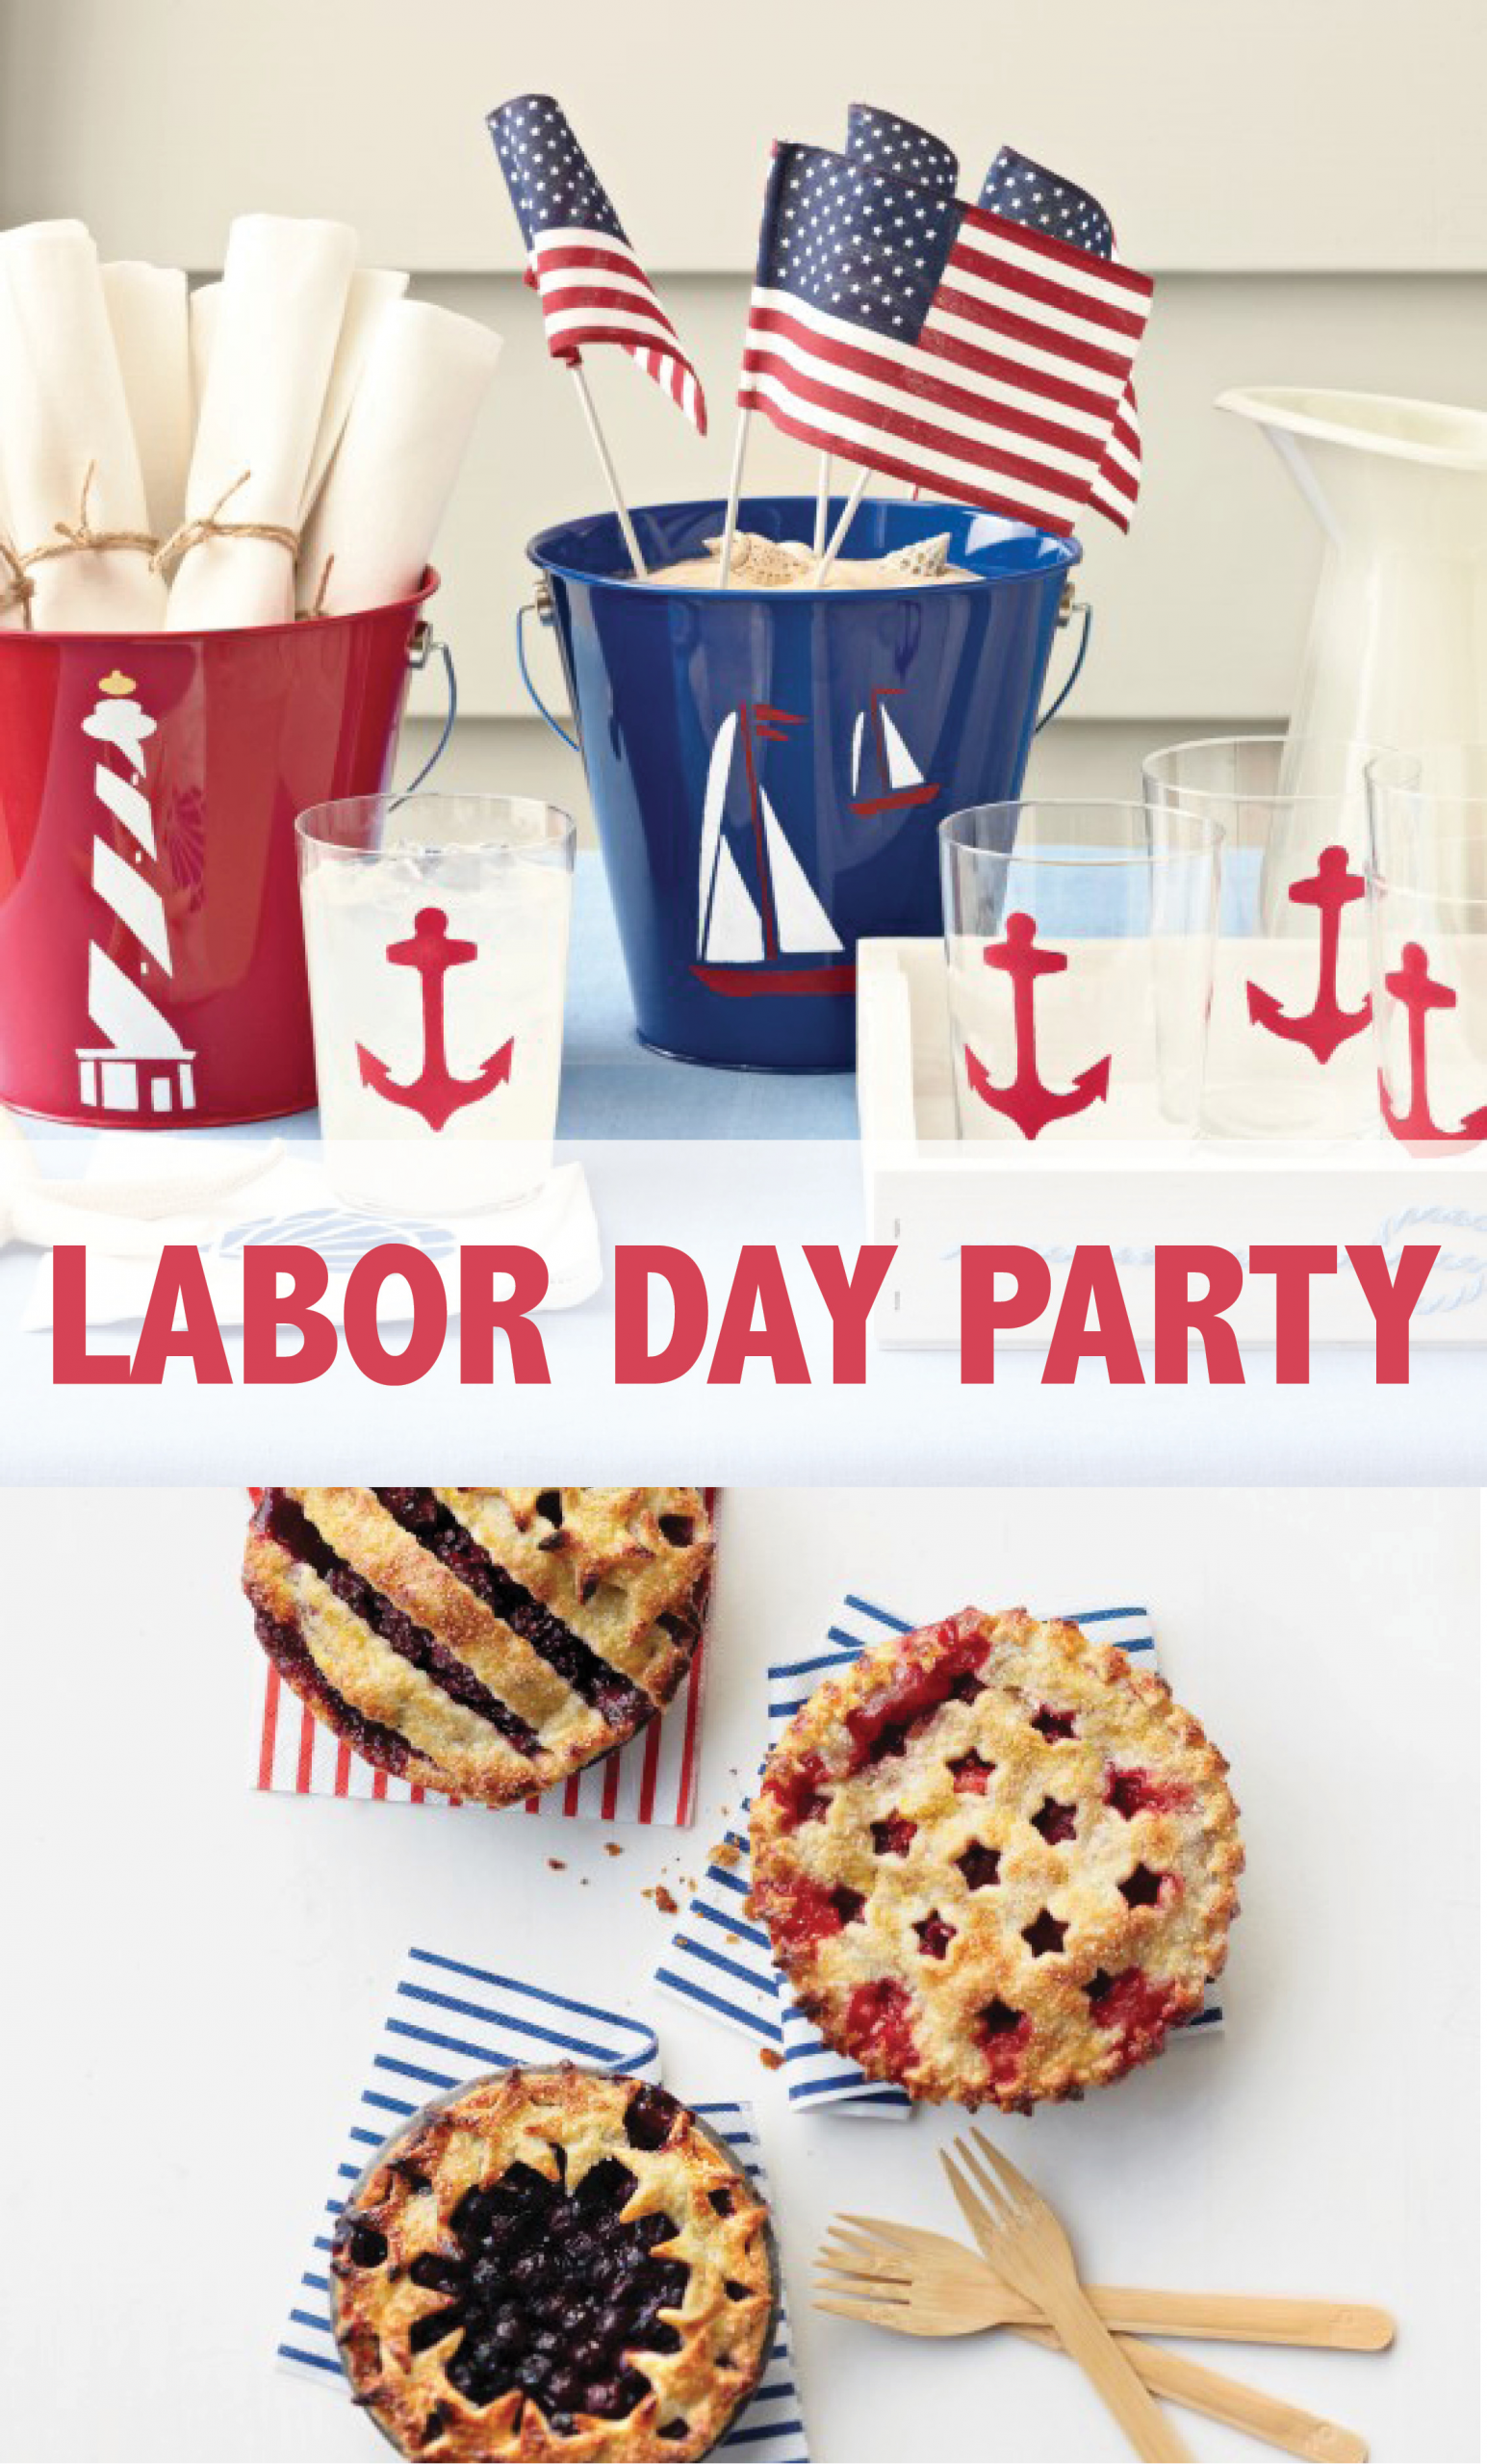 Labor Day Pool Party Ideas
 12 Summery Things to Do on Labor Day